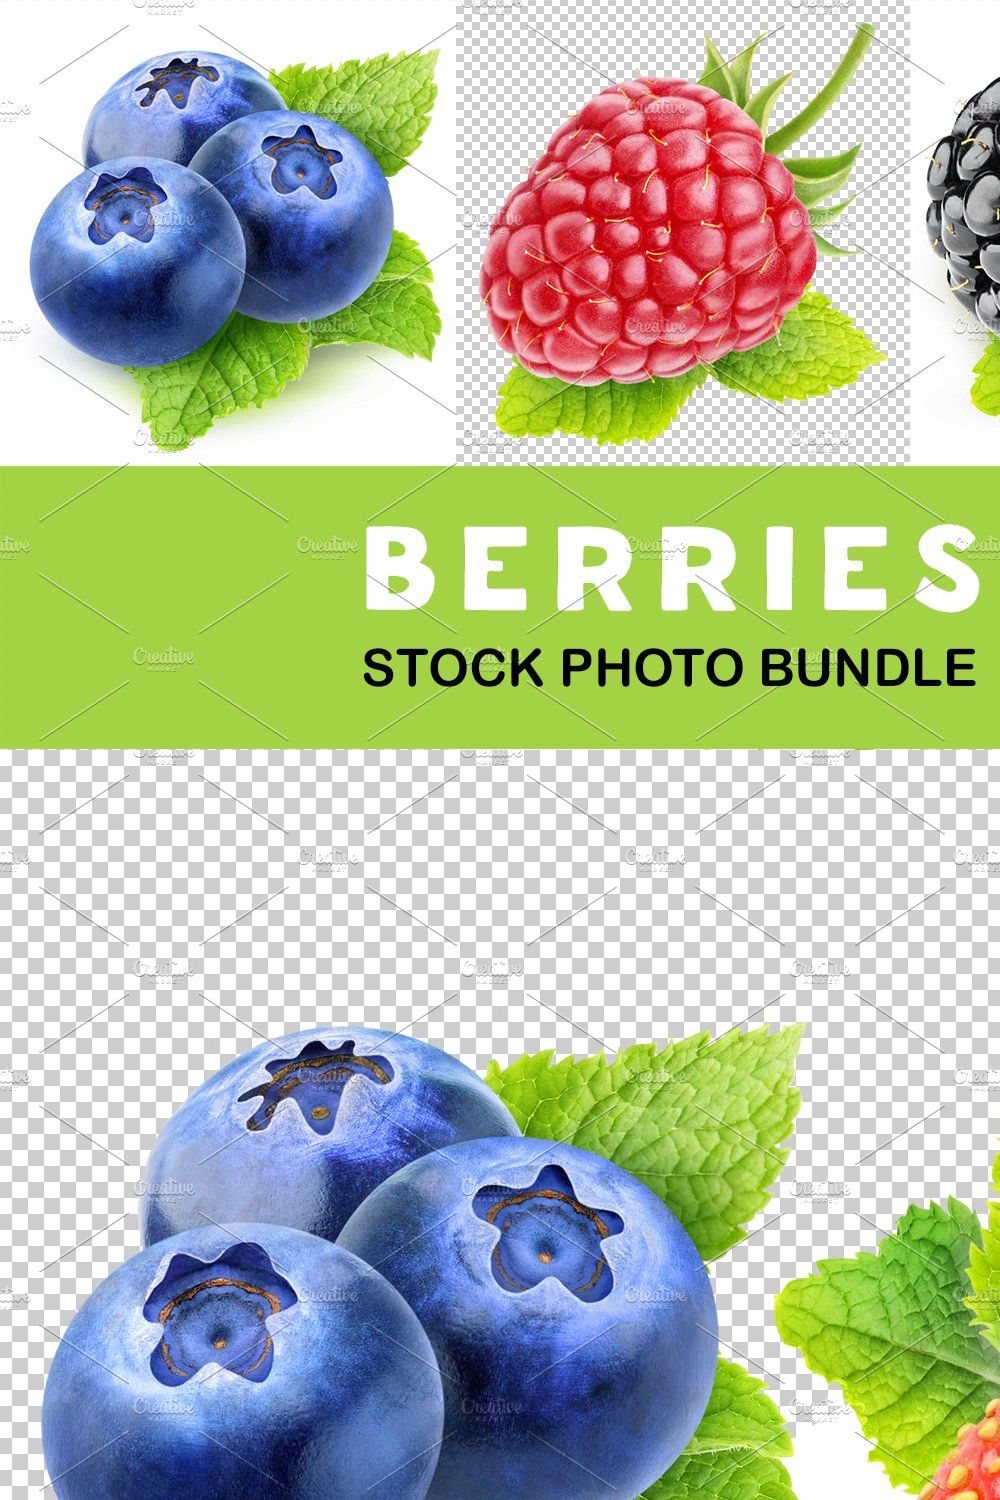 Berries with mint leaf pinterest preview image.